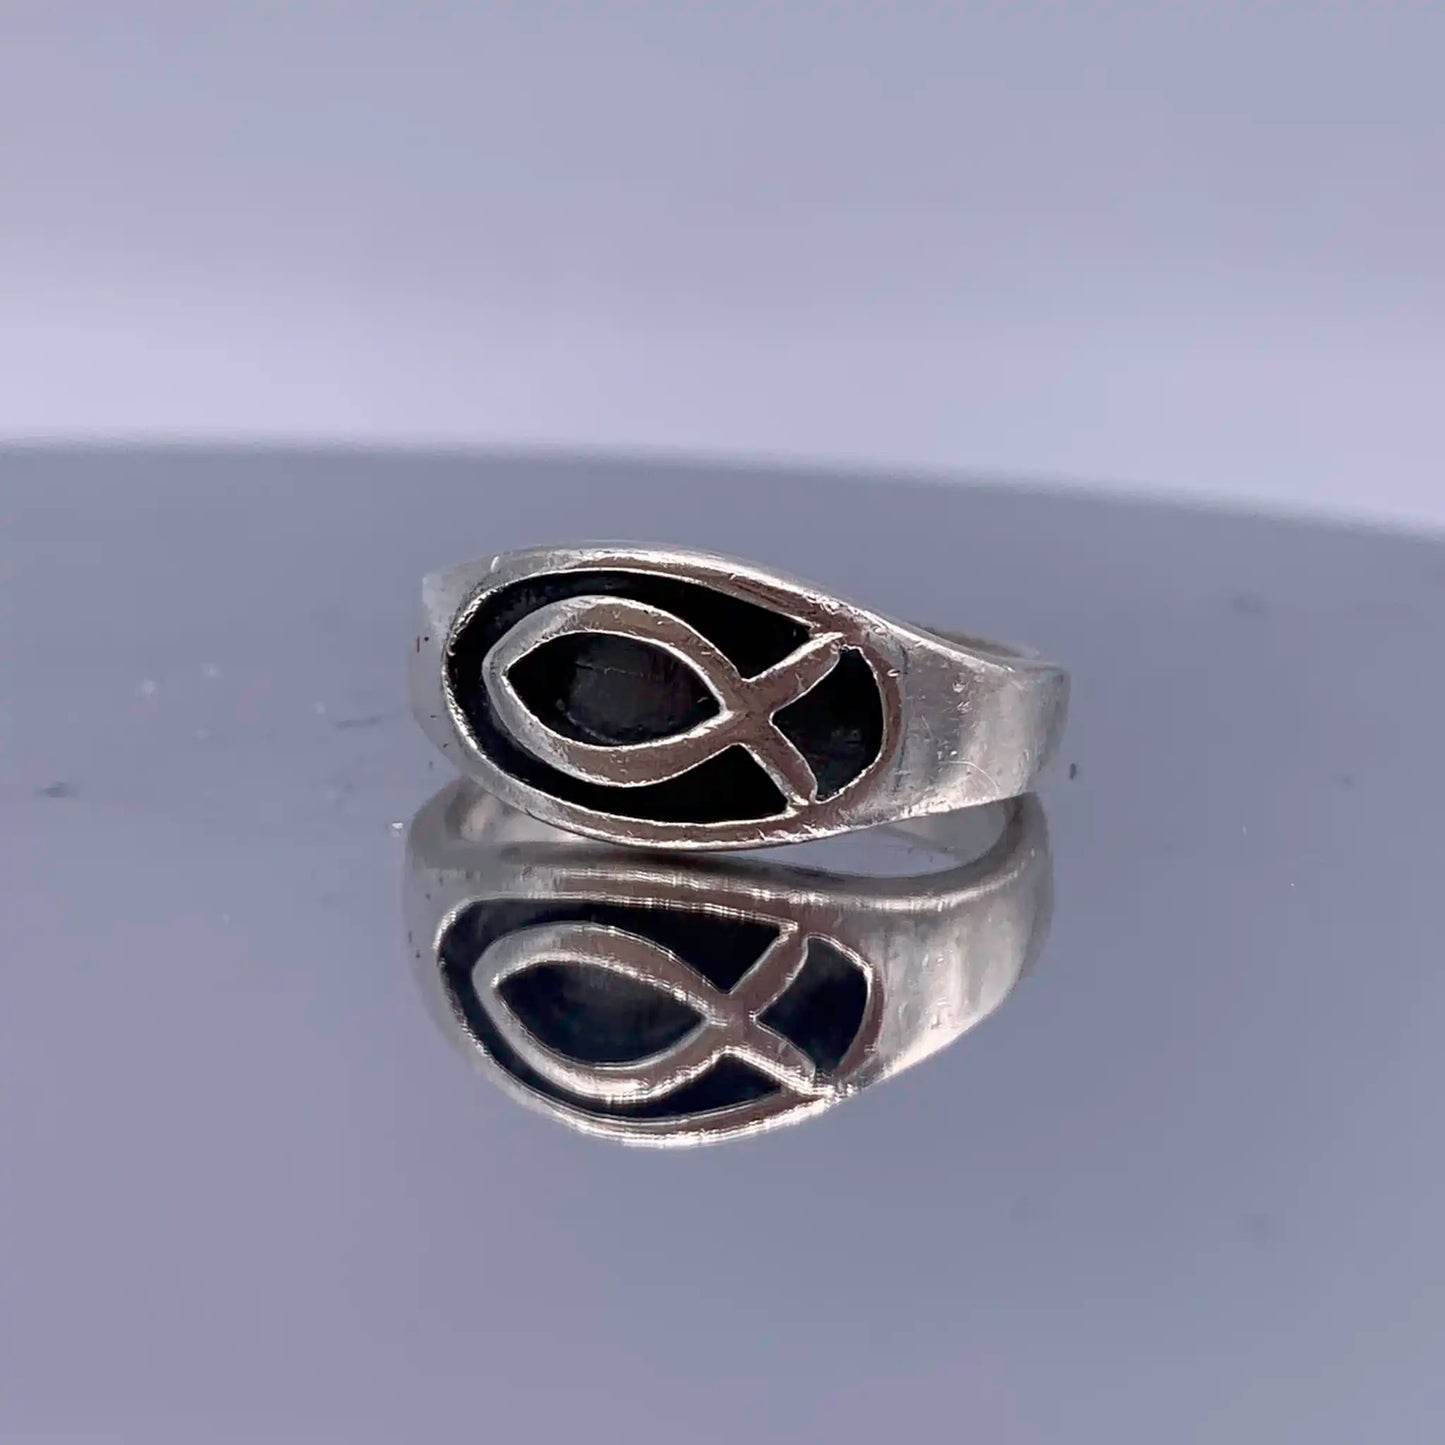 Vintage Sterling-Silver Christian Fish Ring - Hand-Me-Diamonds